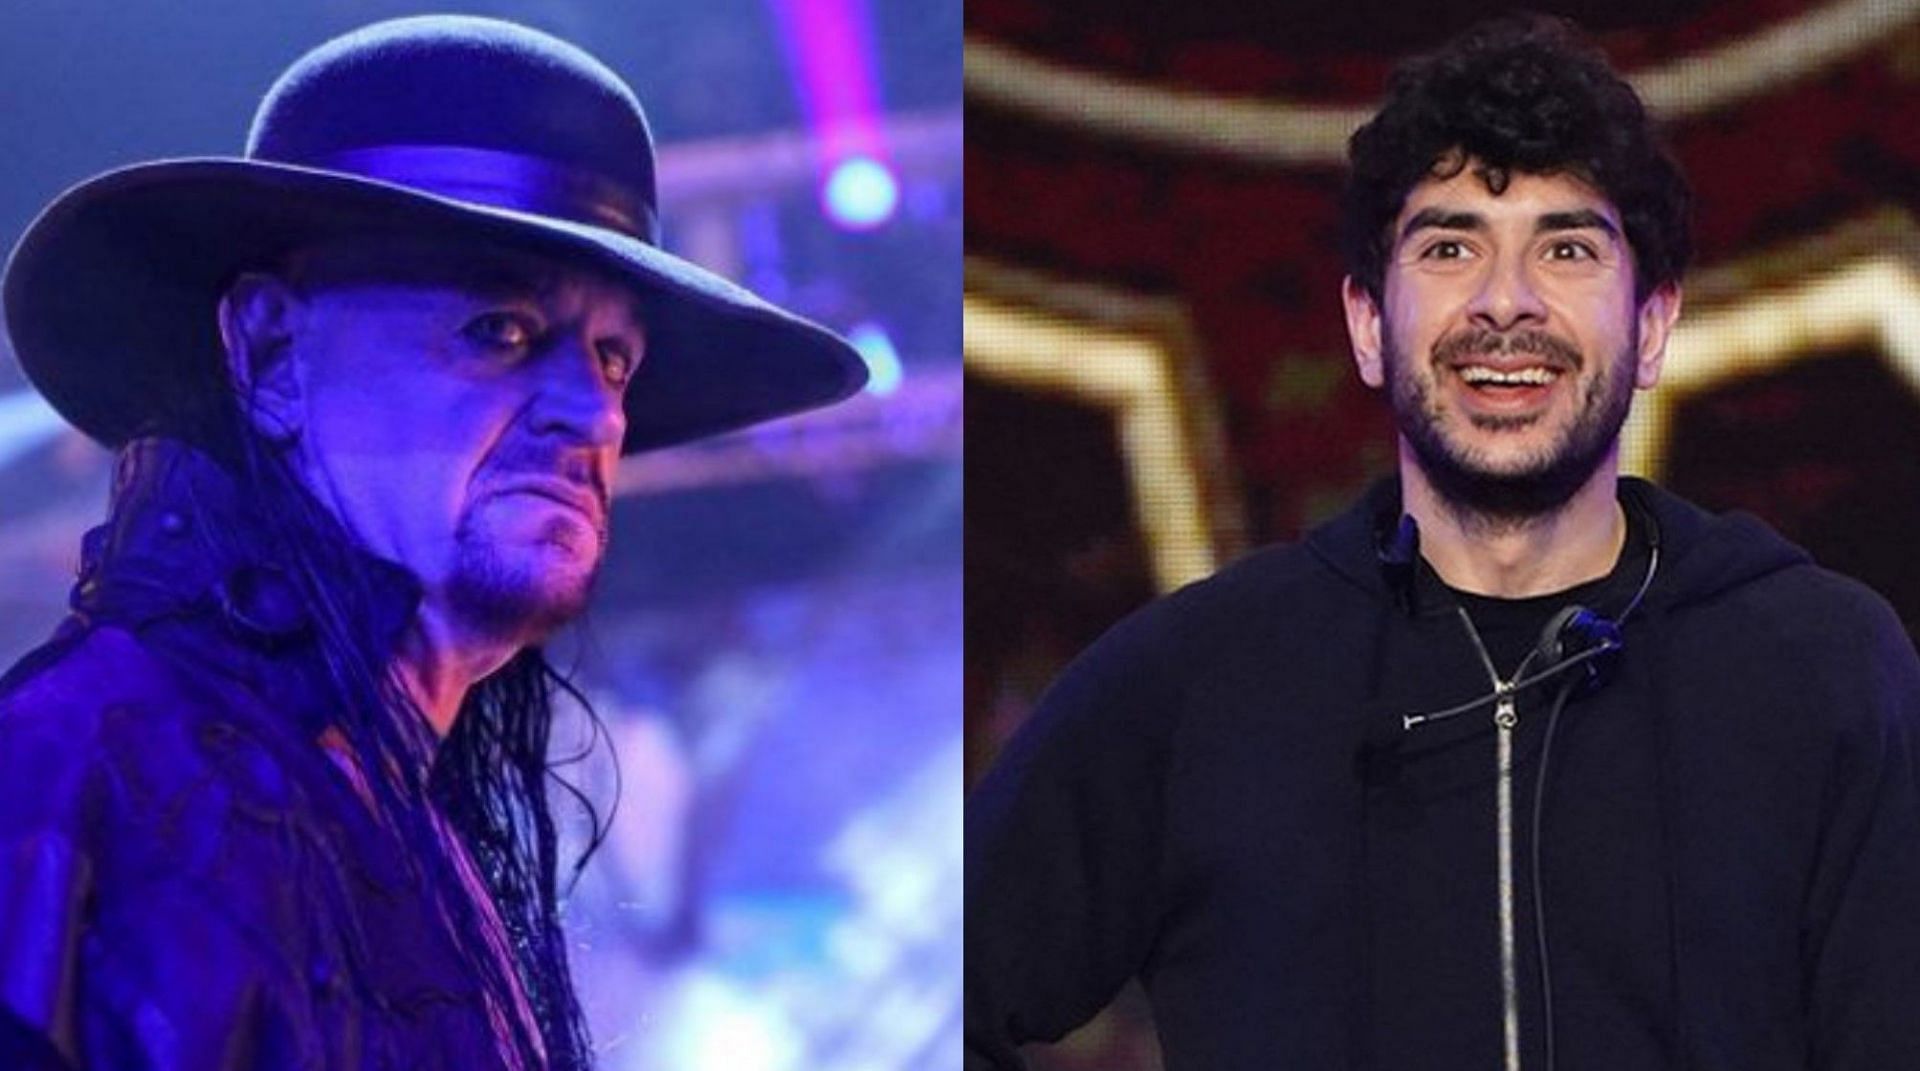 The Undertaker (left) and Tony Khan (right)